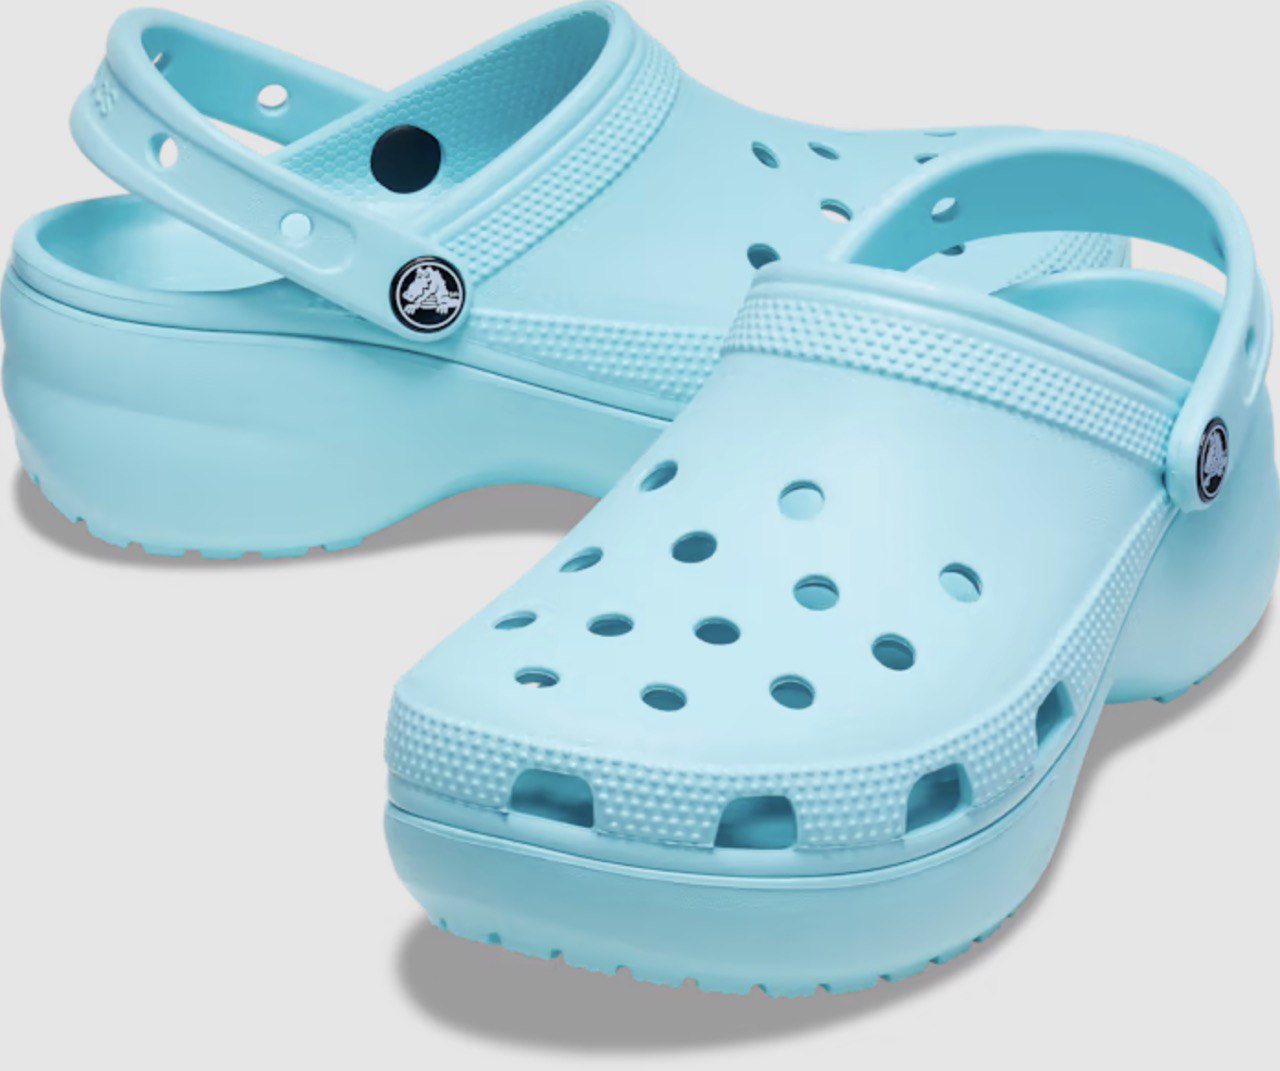 UP TO 50% OFF CROCS ONLINE-ONLY SALE WITH JIBBITZ & SHOES UNDER $20! Shout